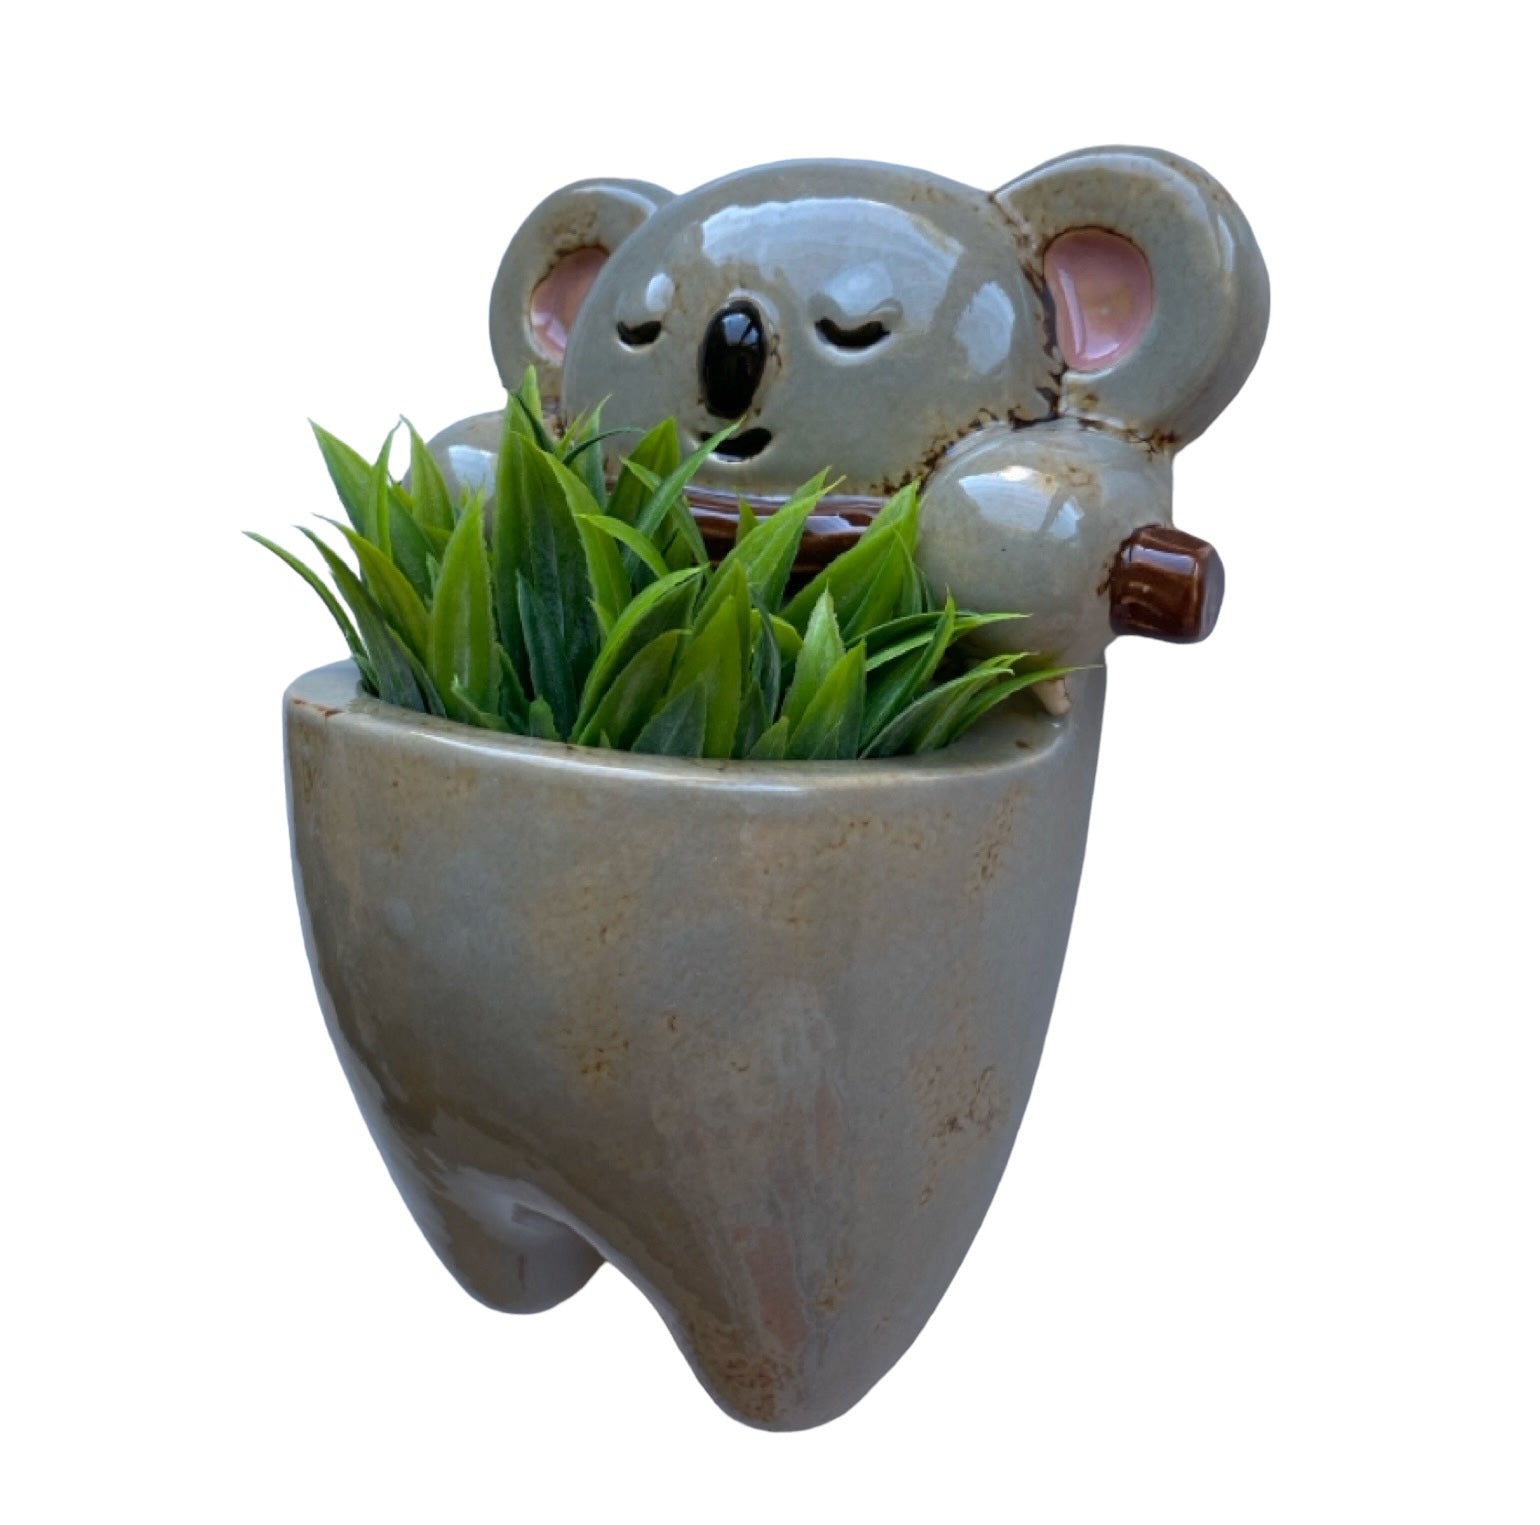 Koala Plant Pot Planter Wall Hanging - The Renmy Store Homewares & Gifts 